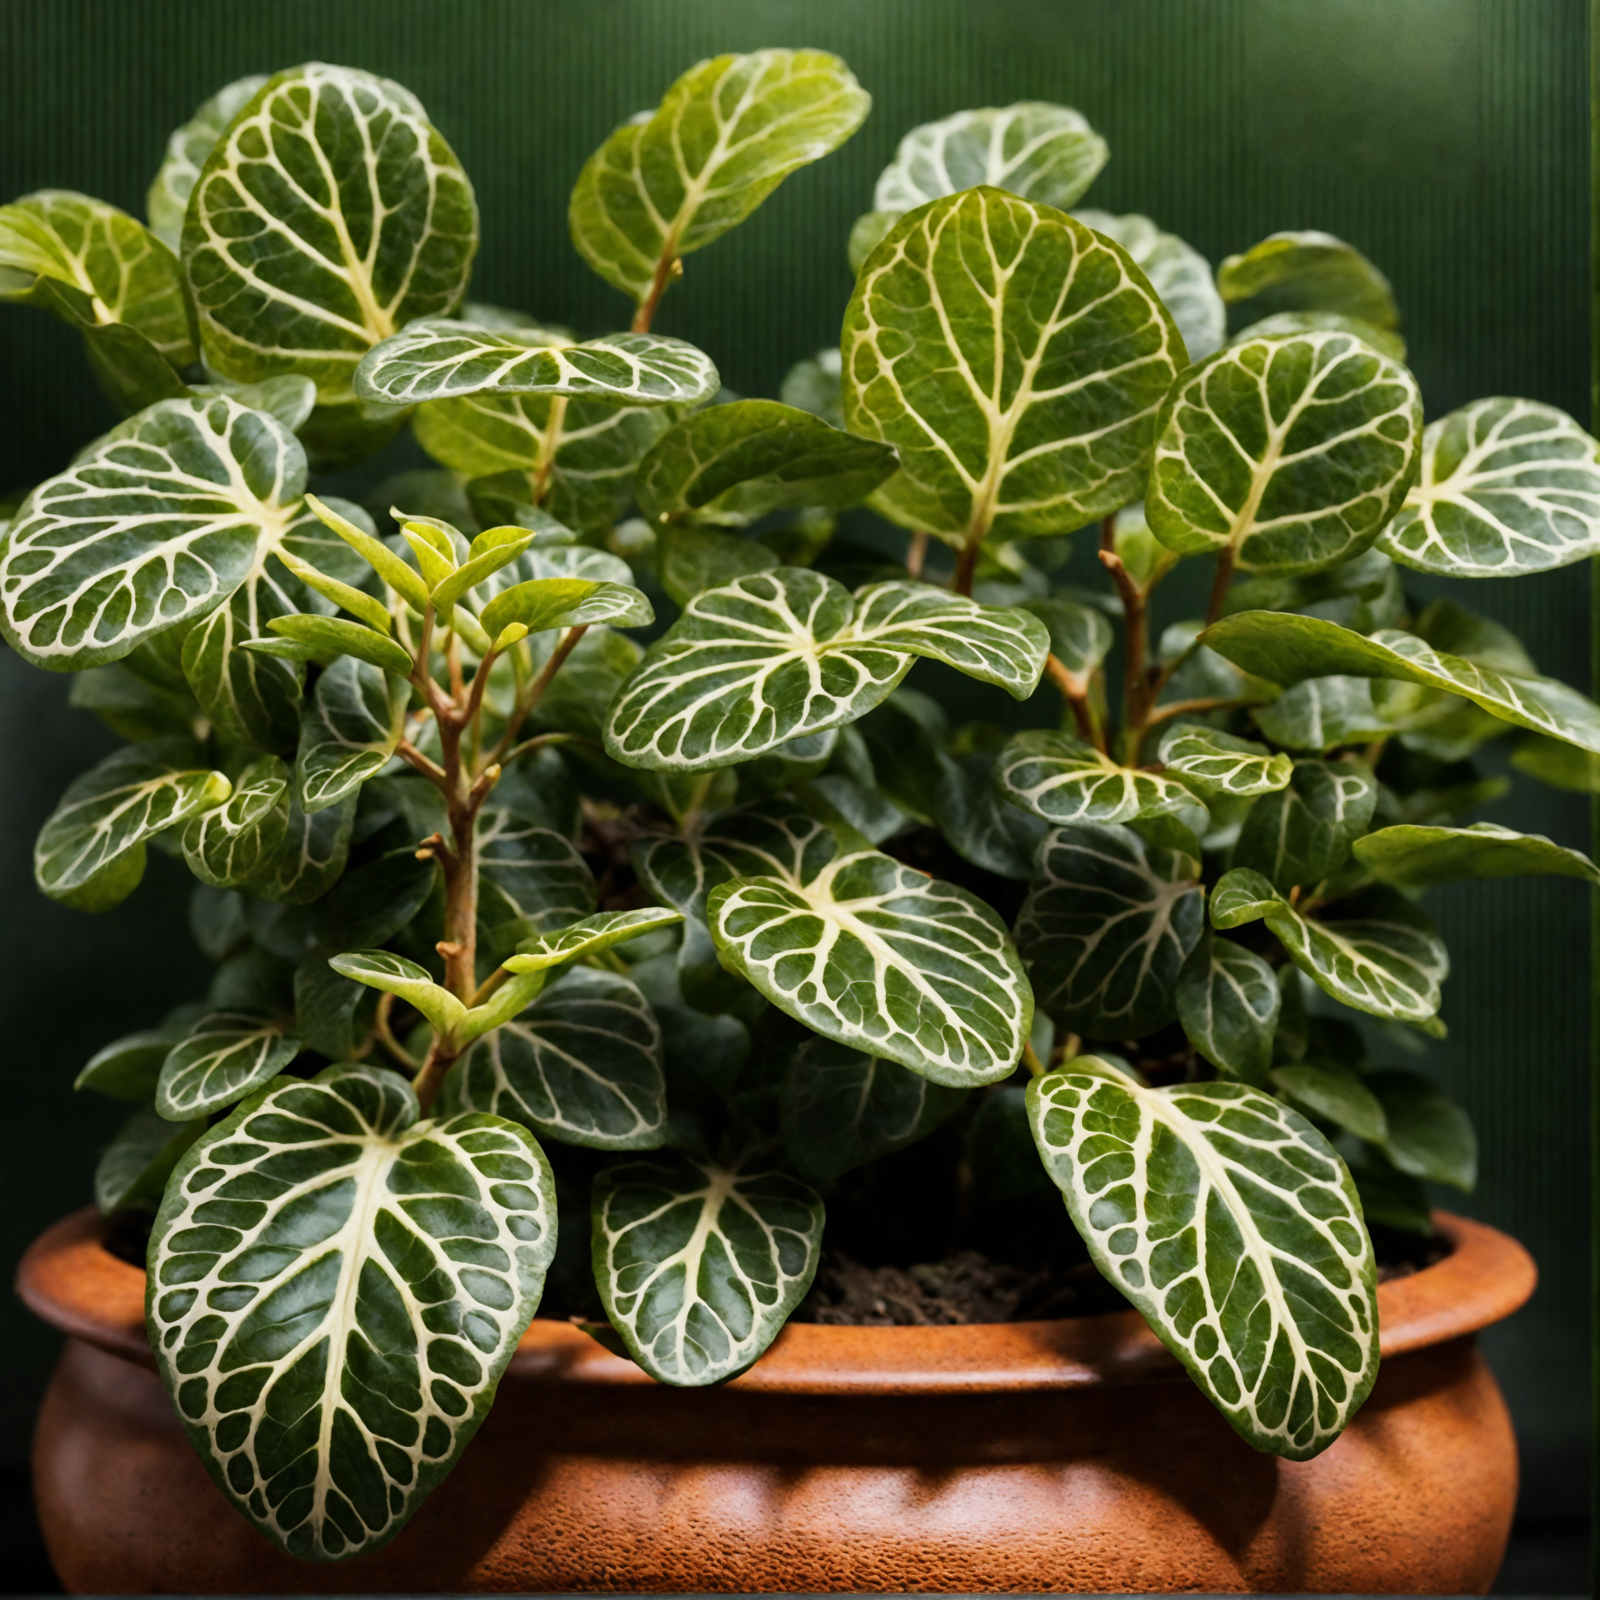 Fittonia albivenis with vibrant green leaves in a planter, clear lighting against a dark background.